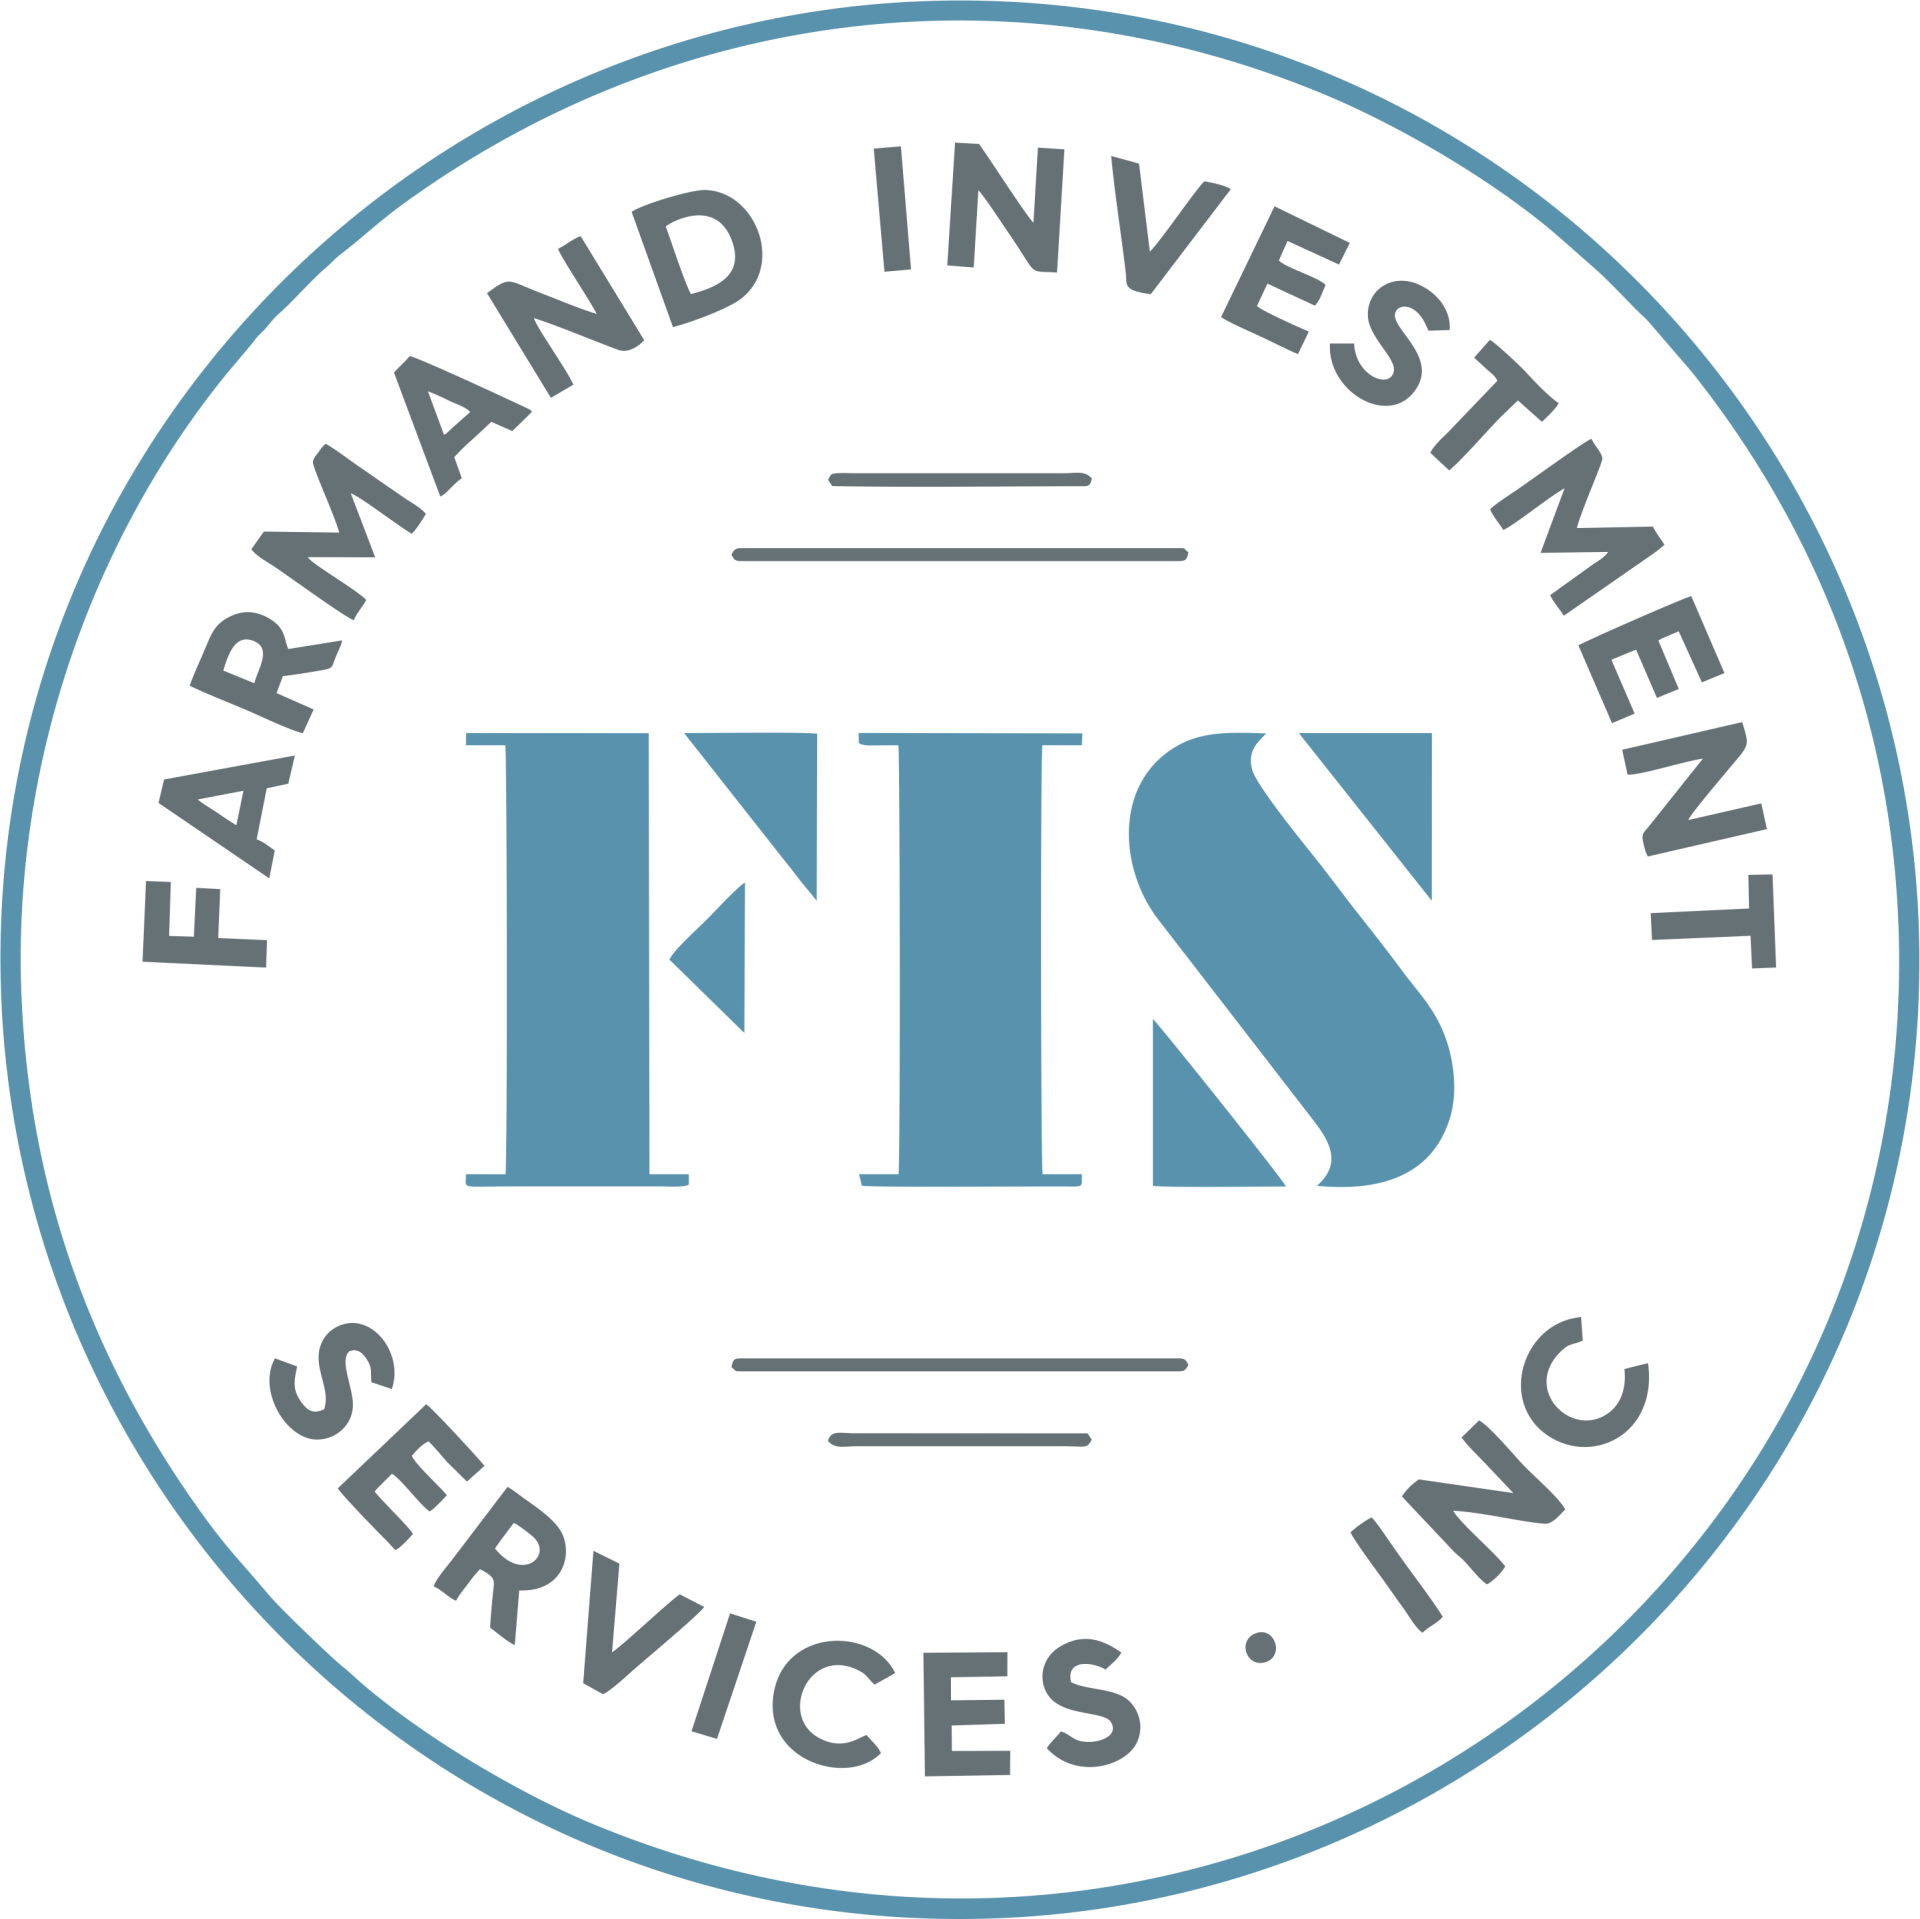 Farmand Investment Services in Jacksonville Florida